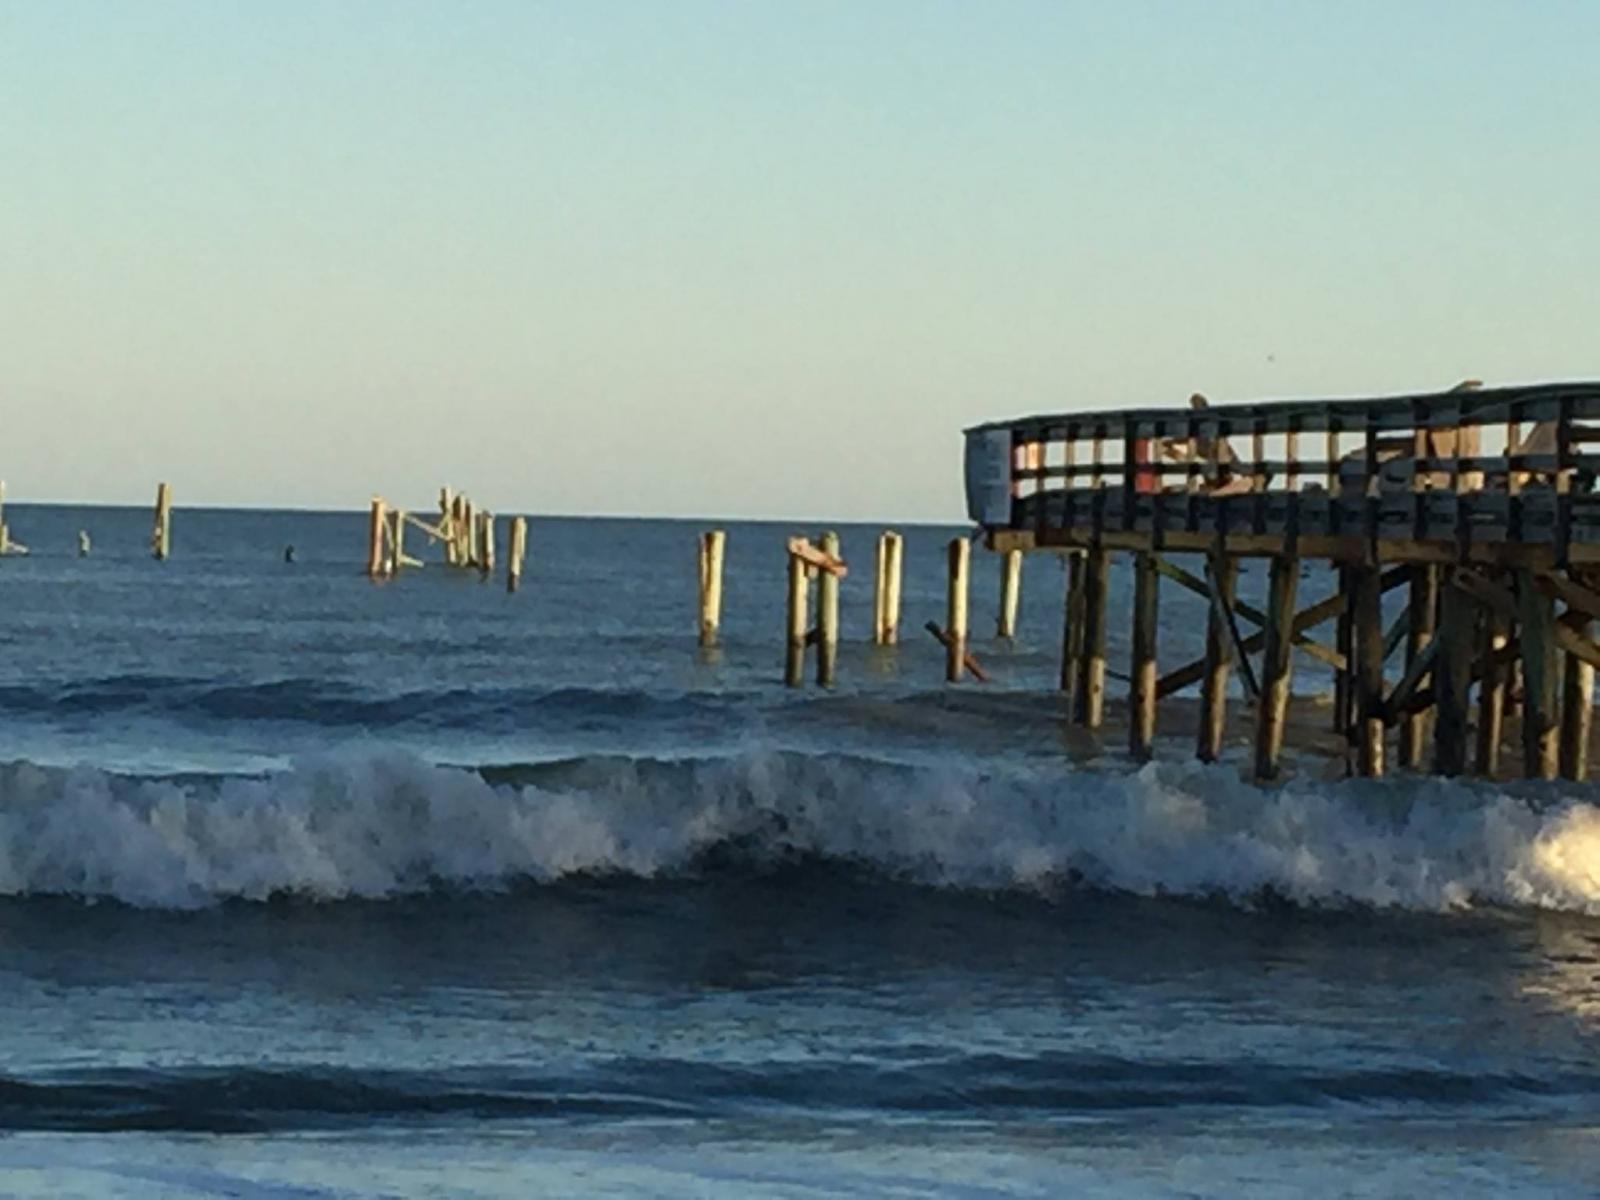 Huge waves from Hurricane Matthew destroyed Springmaid Pier in Myrtle Beach, SC.  This also caused the loss of the NOAA weather station on the pier.